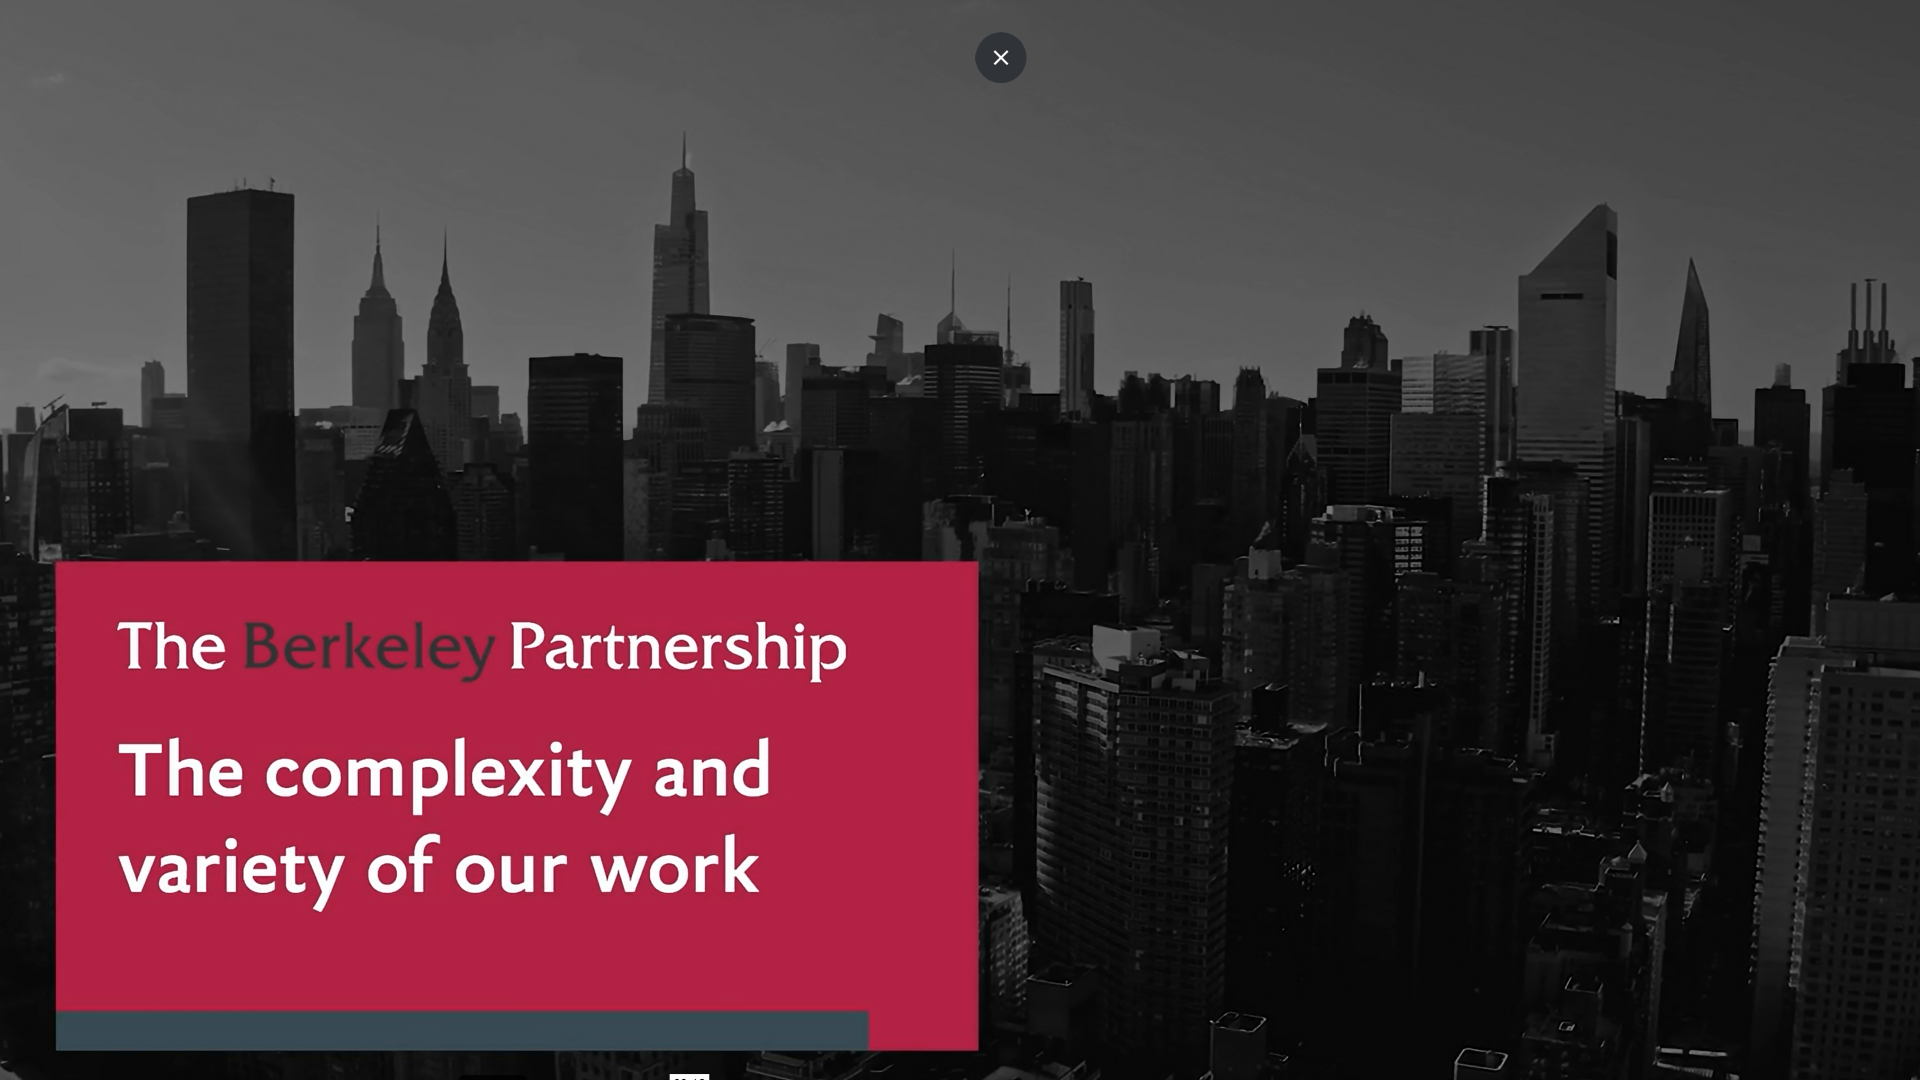 An on-screen banner says, "The complexity and variety of our work." A grayscale image of a New York City skyline is in the background.